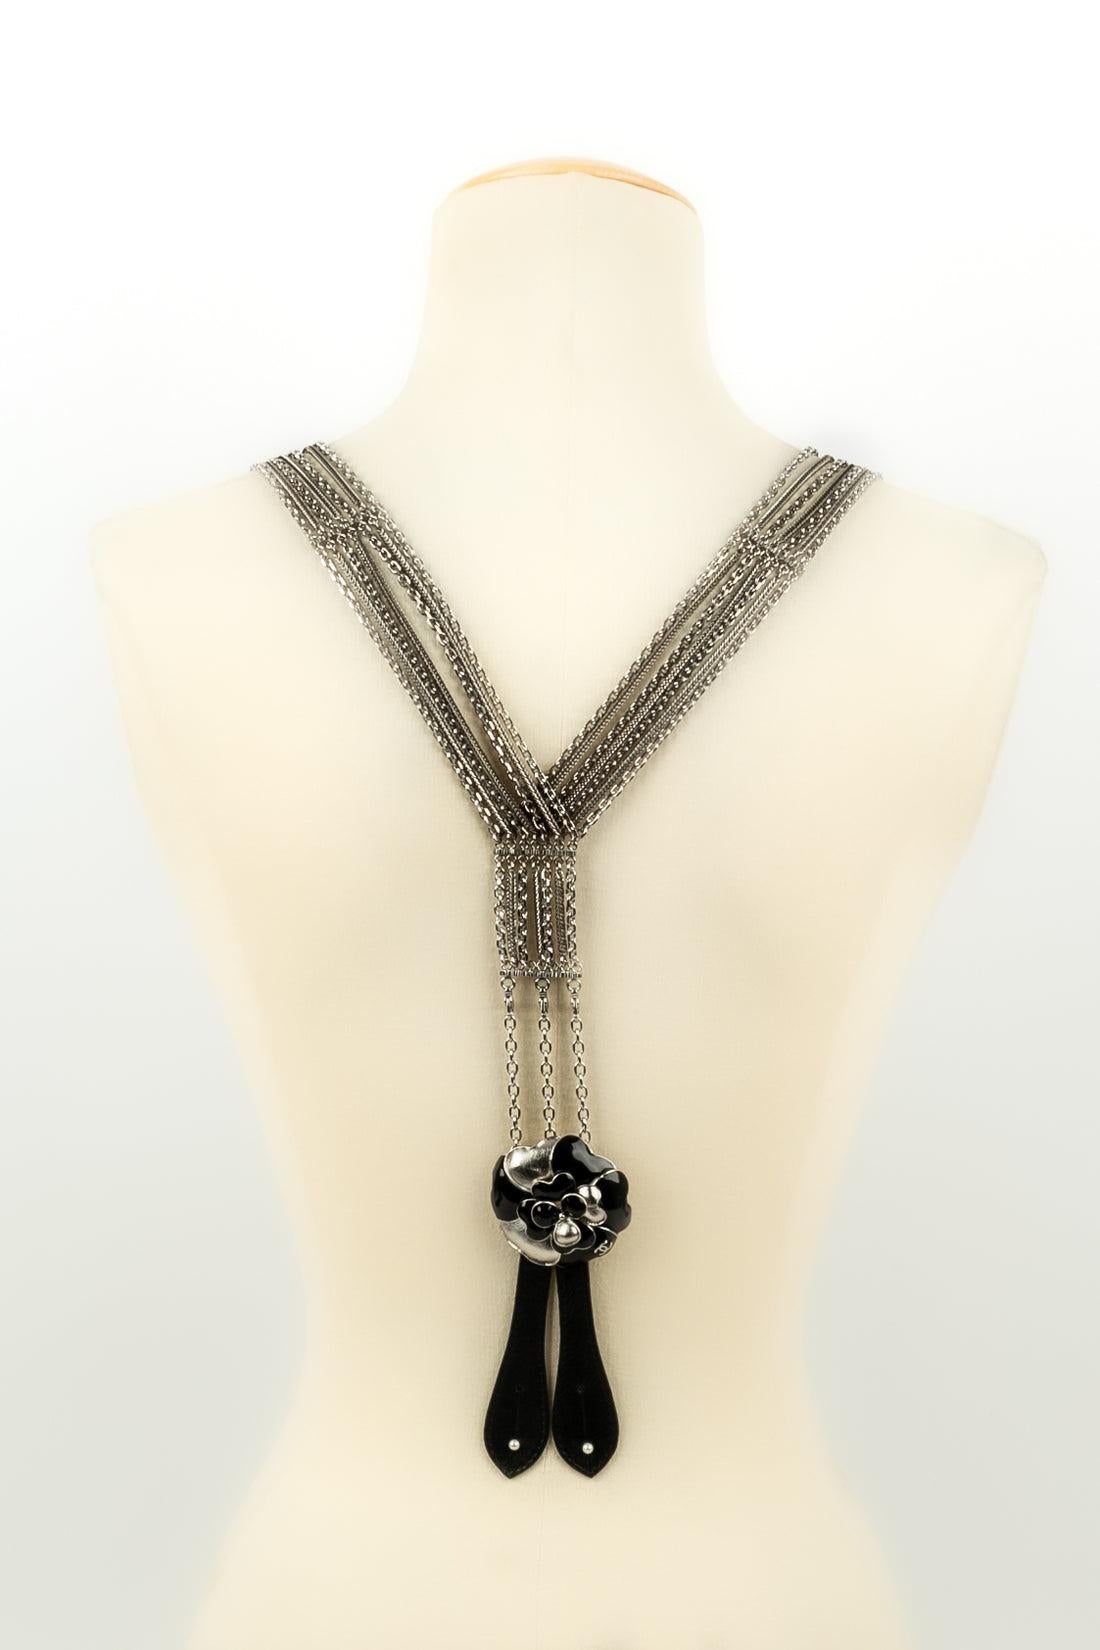 Chanel Straps in Silver Chain, Black Leather and Camellia Spring, 2007 For Sale 4